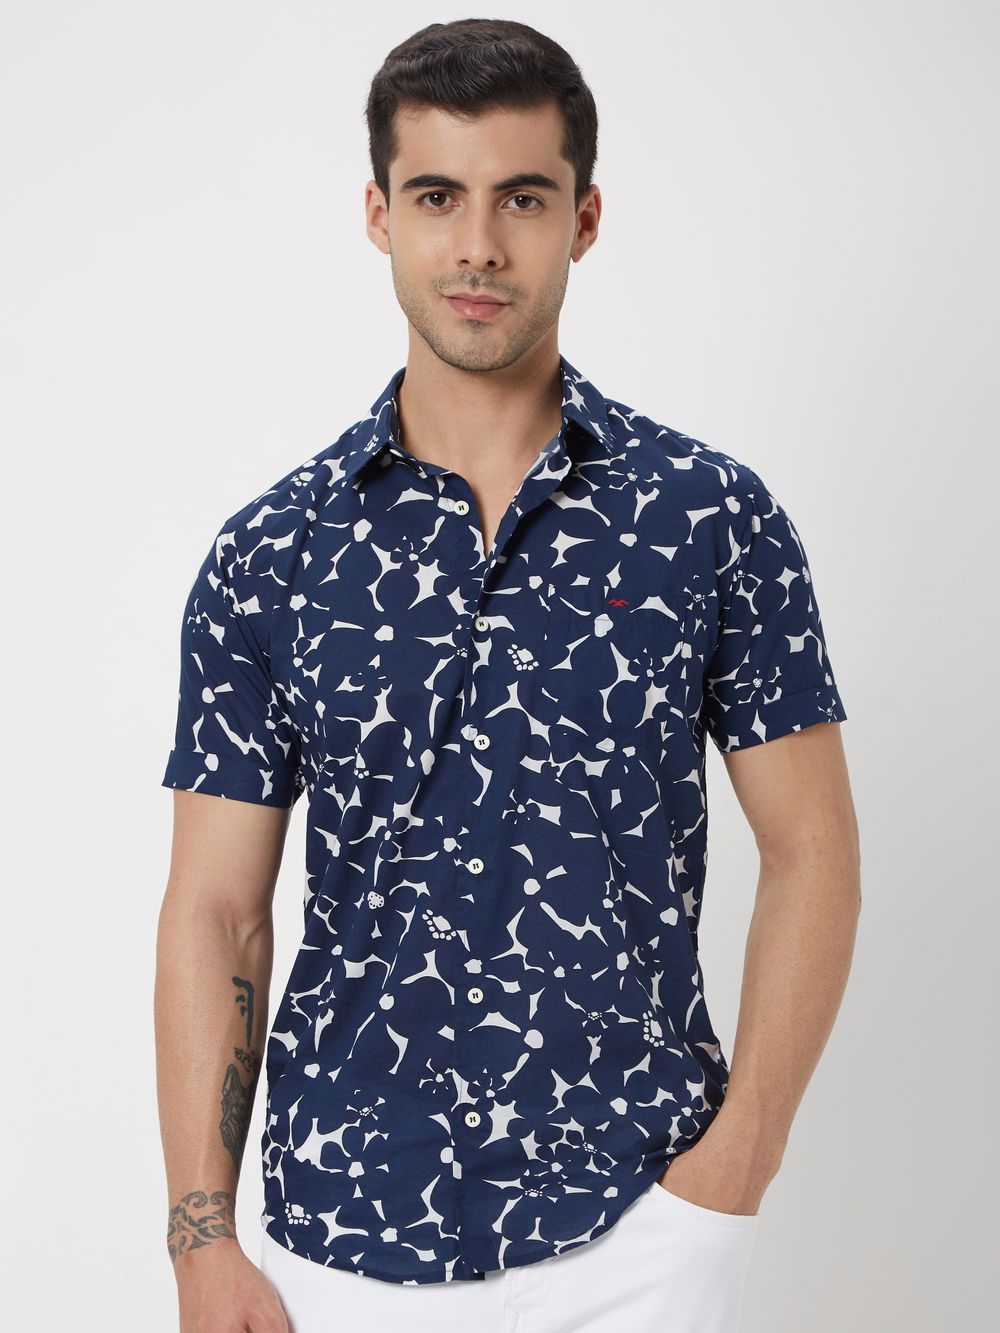 Navy & White Floral Print Slim Fit Casual Shirt